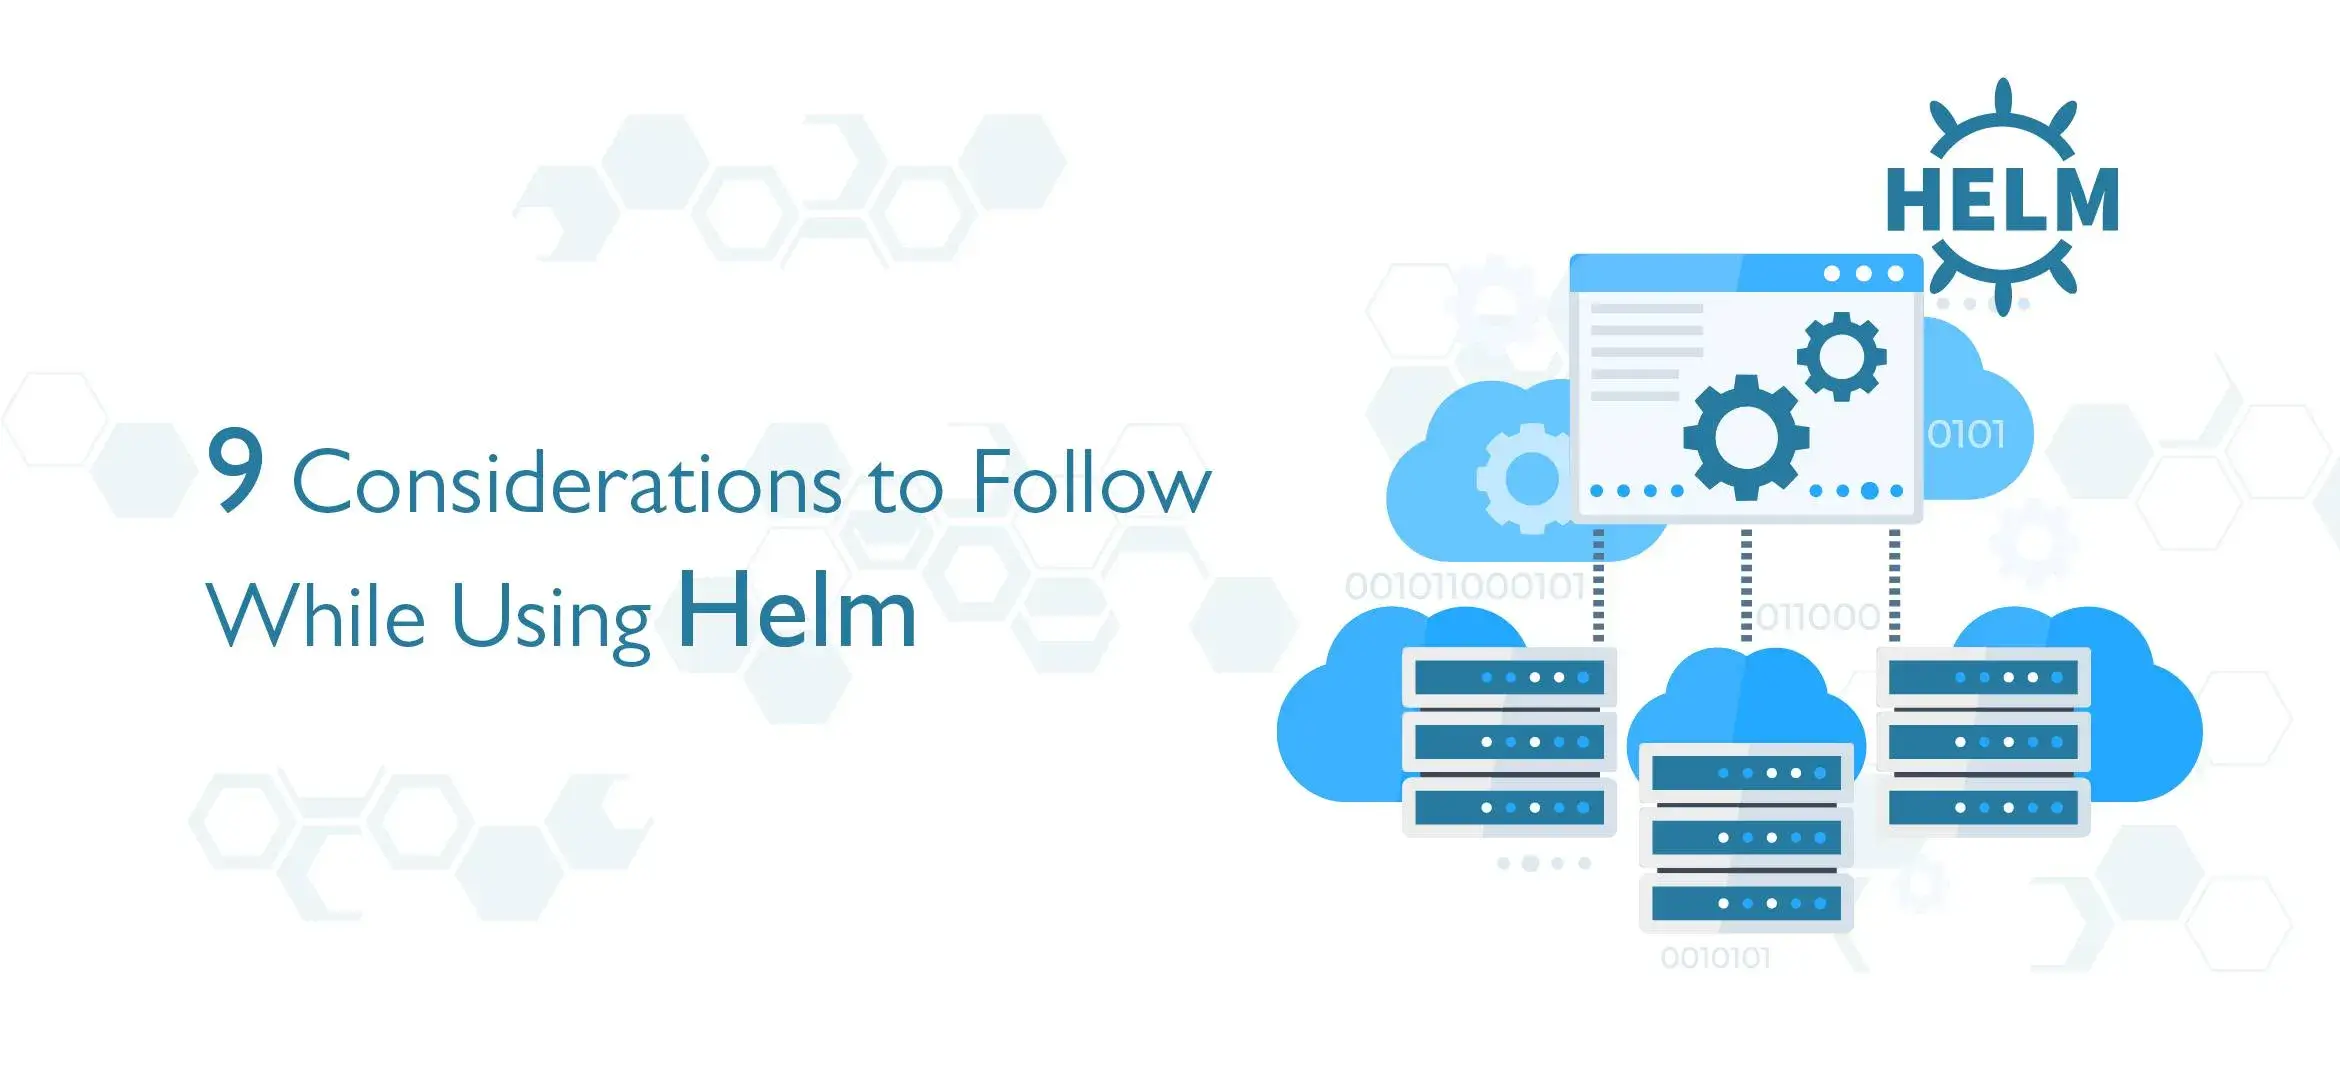 9 Considerations to Follow While Using Helm